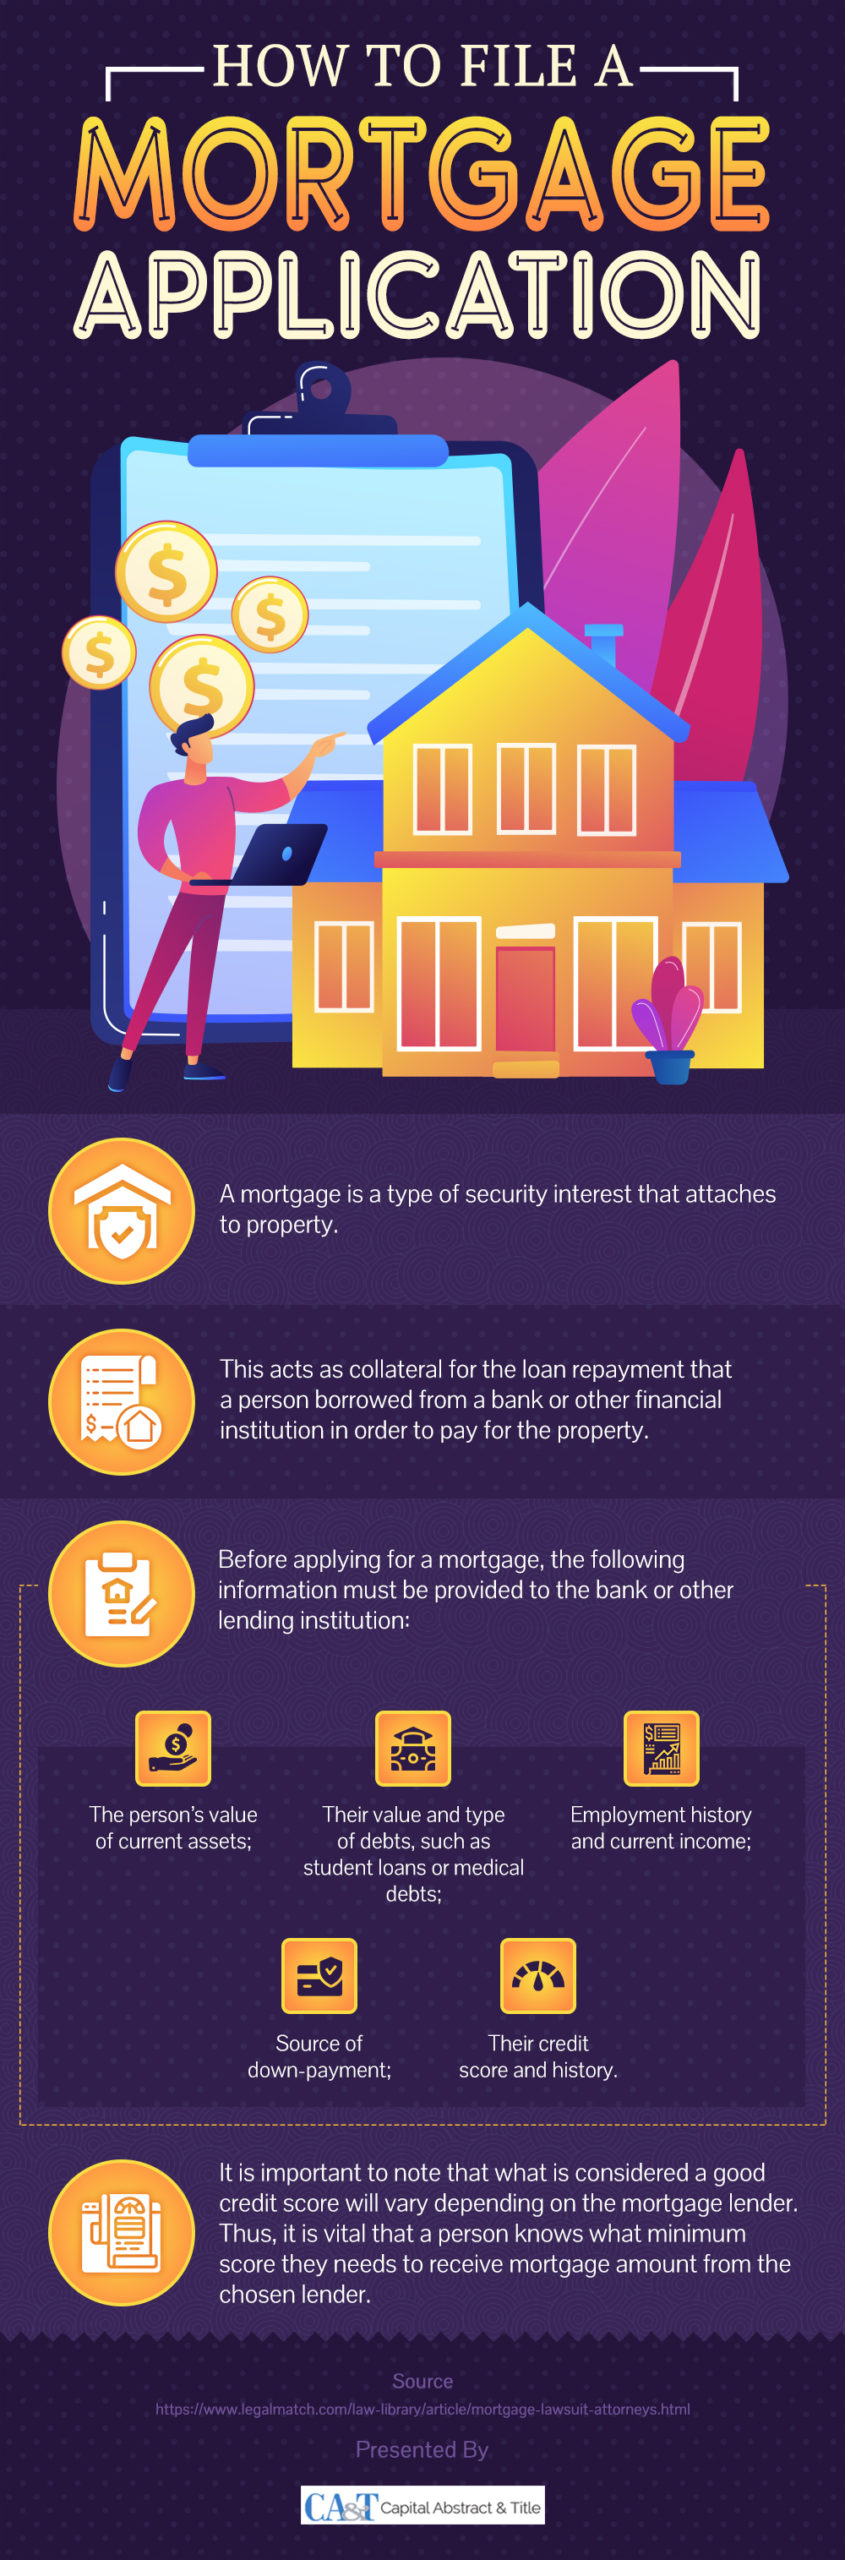 How To File A Mortgage Application